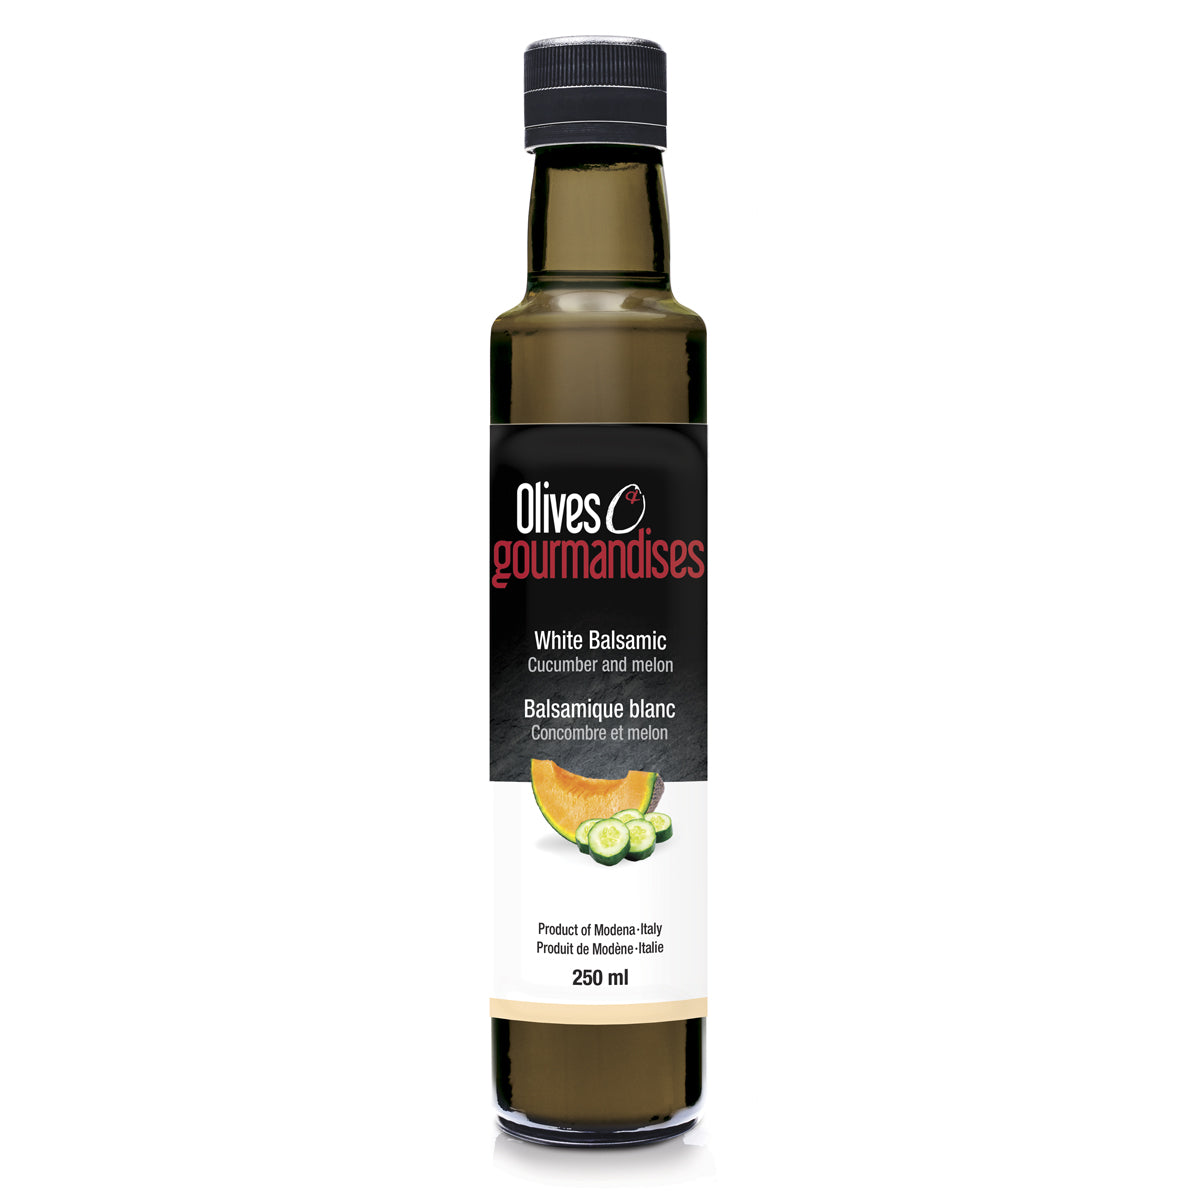 Cucumber and melon - White balsamic